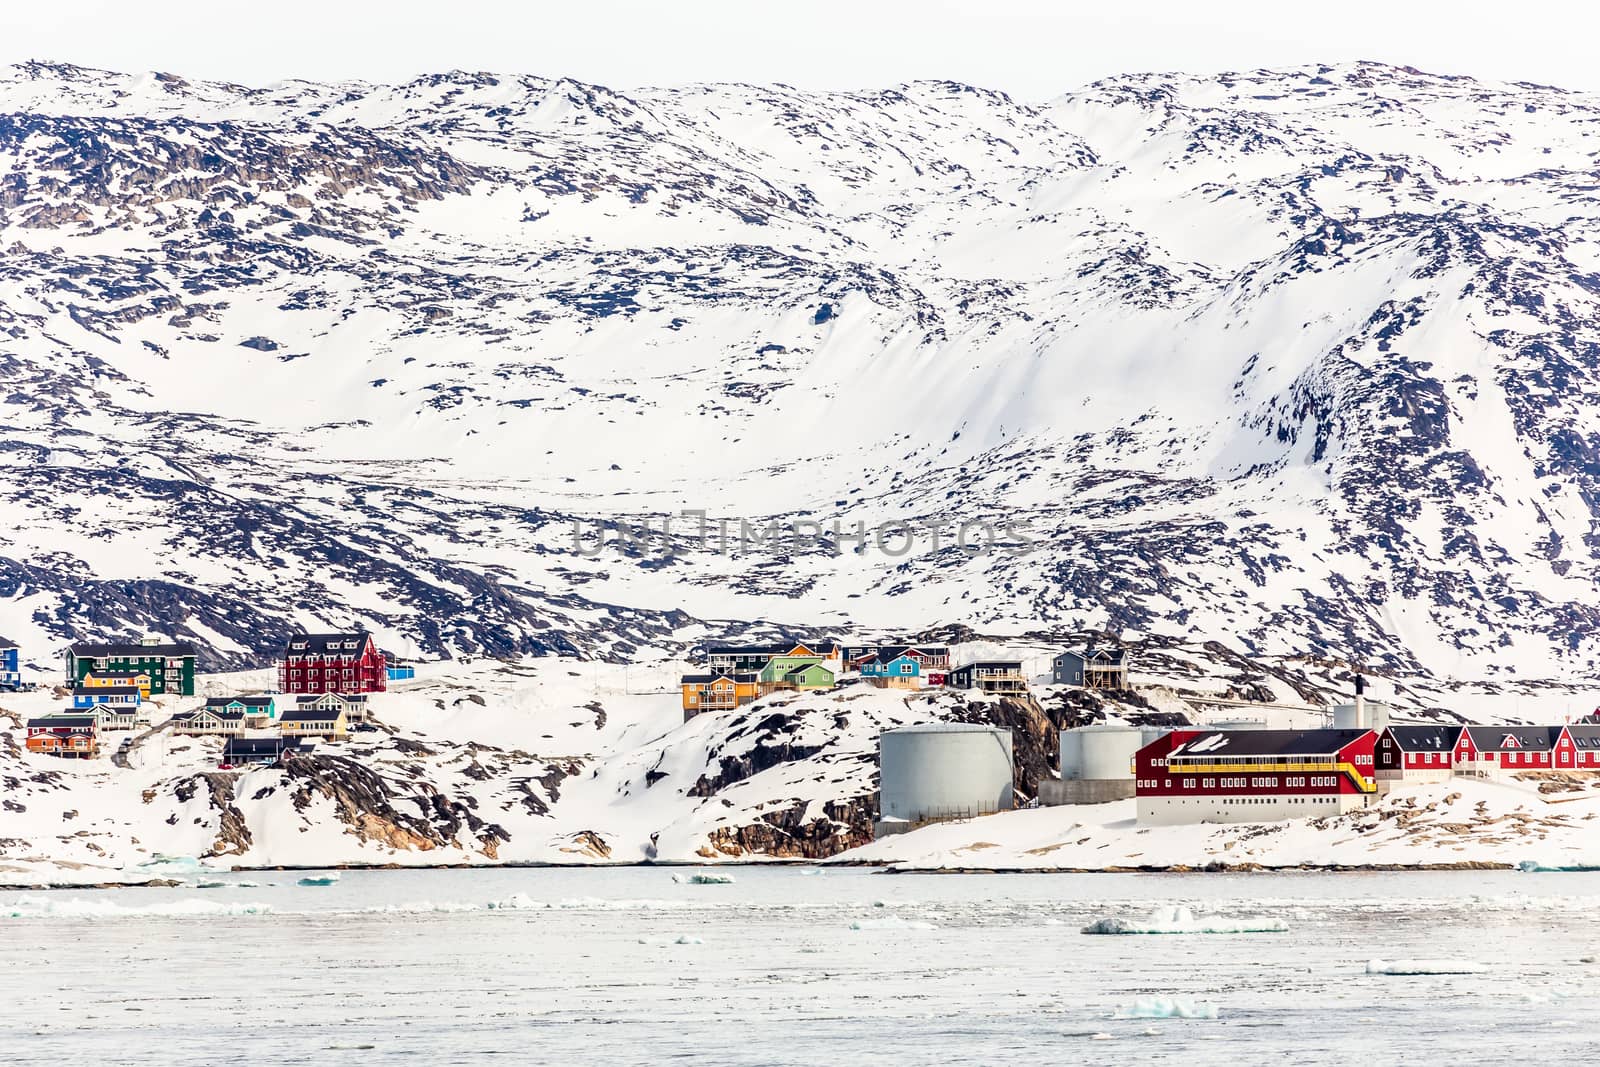 Arctic city panorama with colorful Inuit cottages and oil factory on the rocky hills covered in snow and mountain in the background, Ilulissat, Avannaata municipality, Greenland